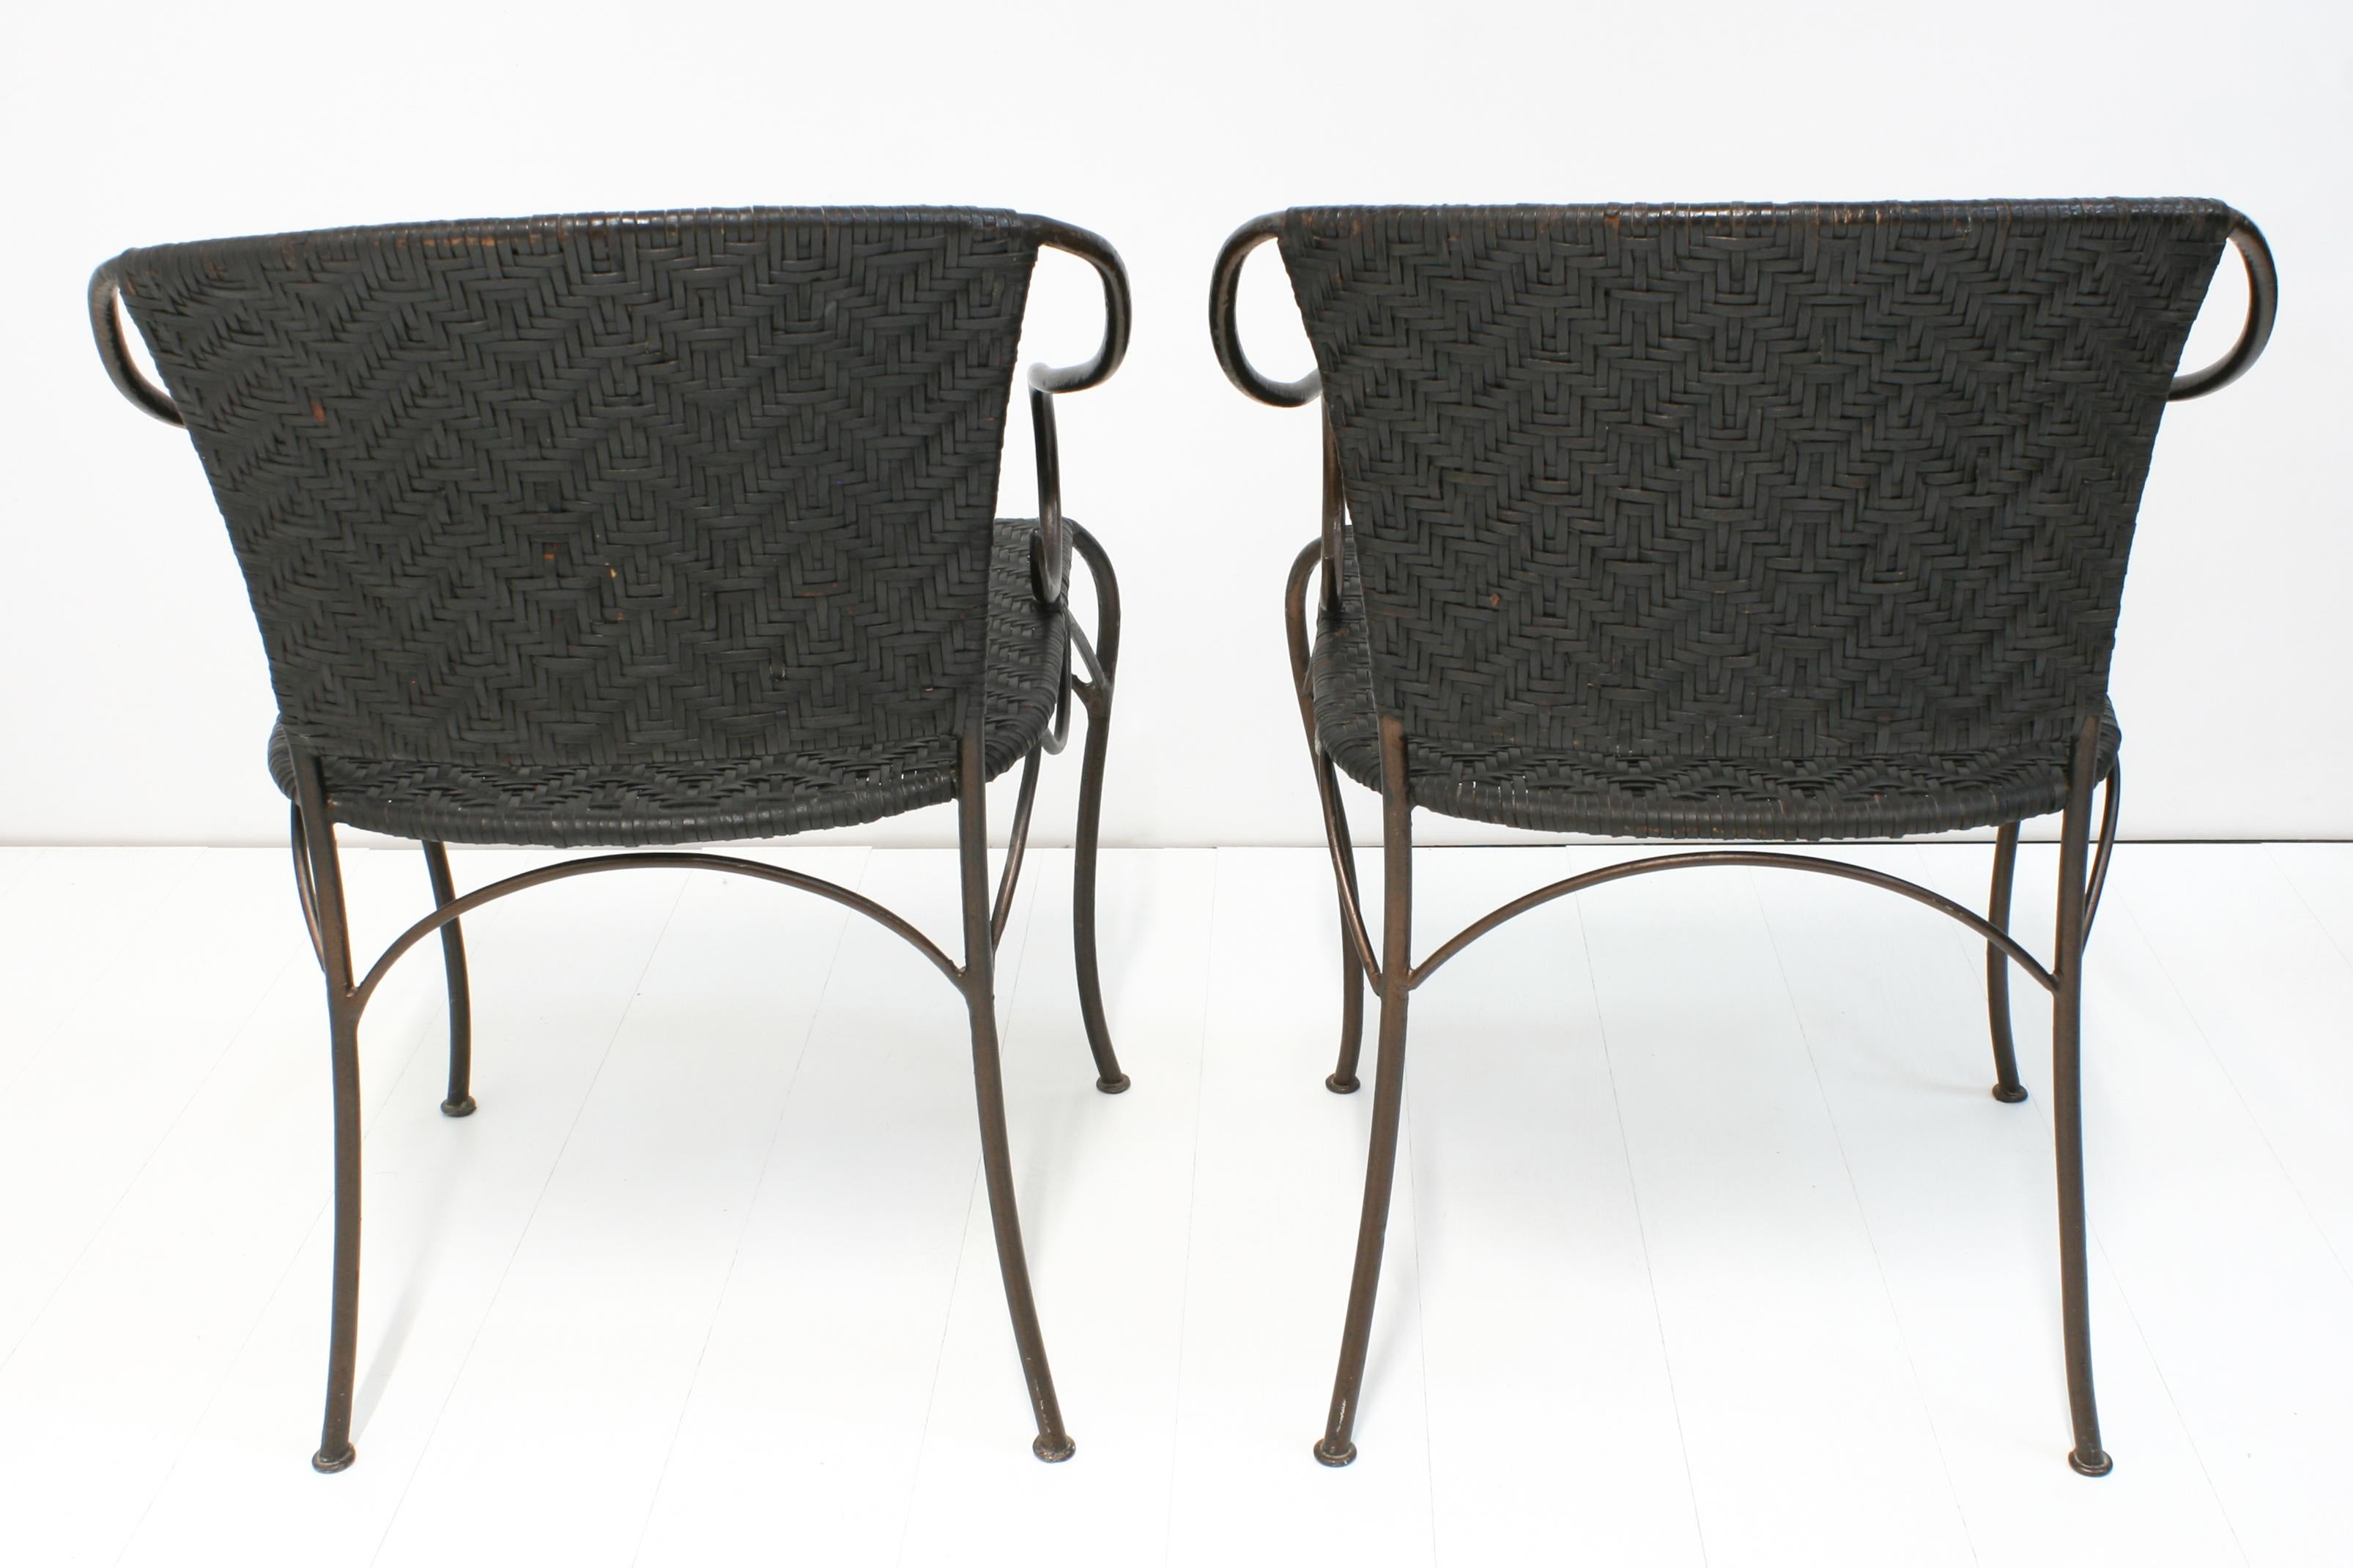 8x Wrought Iron & Leather Anatol Dining Armchairs by Gunther Lambert, 1990s For Sale 4